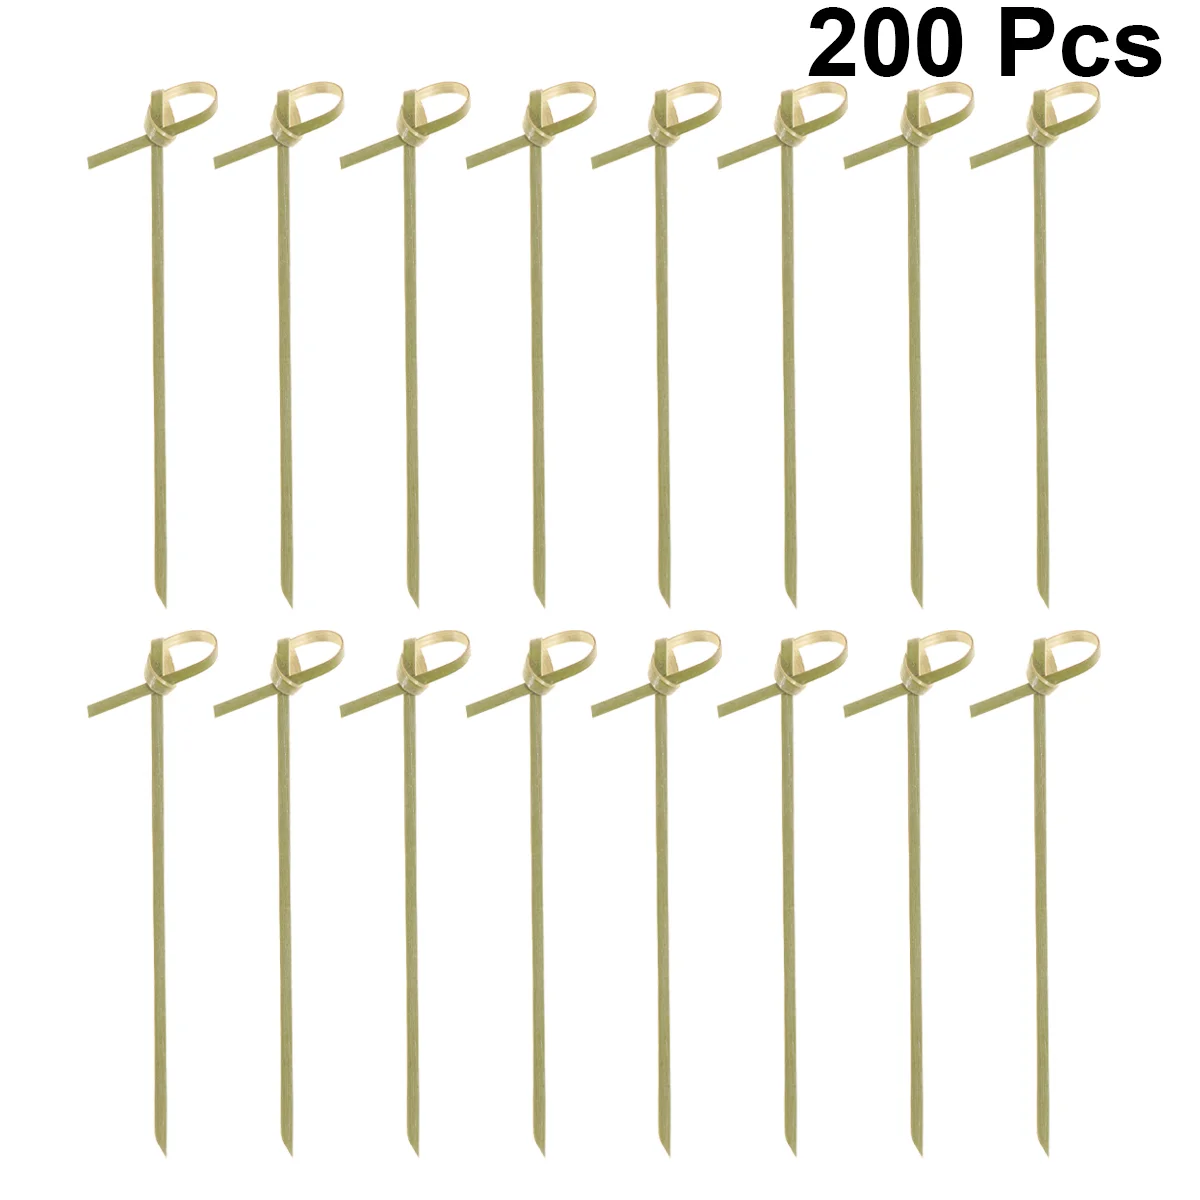 

Picks Cocktail Toothpicks Skewers Fruit Appetizer Knot Sticks Party Martini Drink Barbeque Sandwich Pick Stick Appetizers Wooden